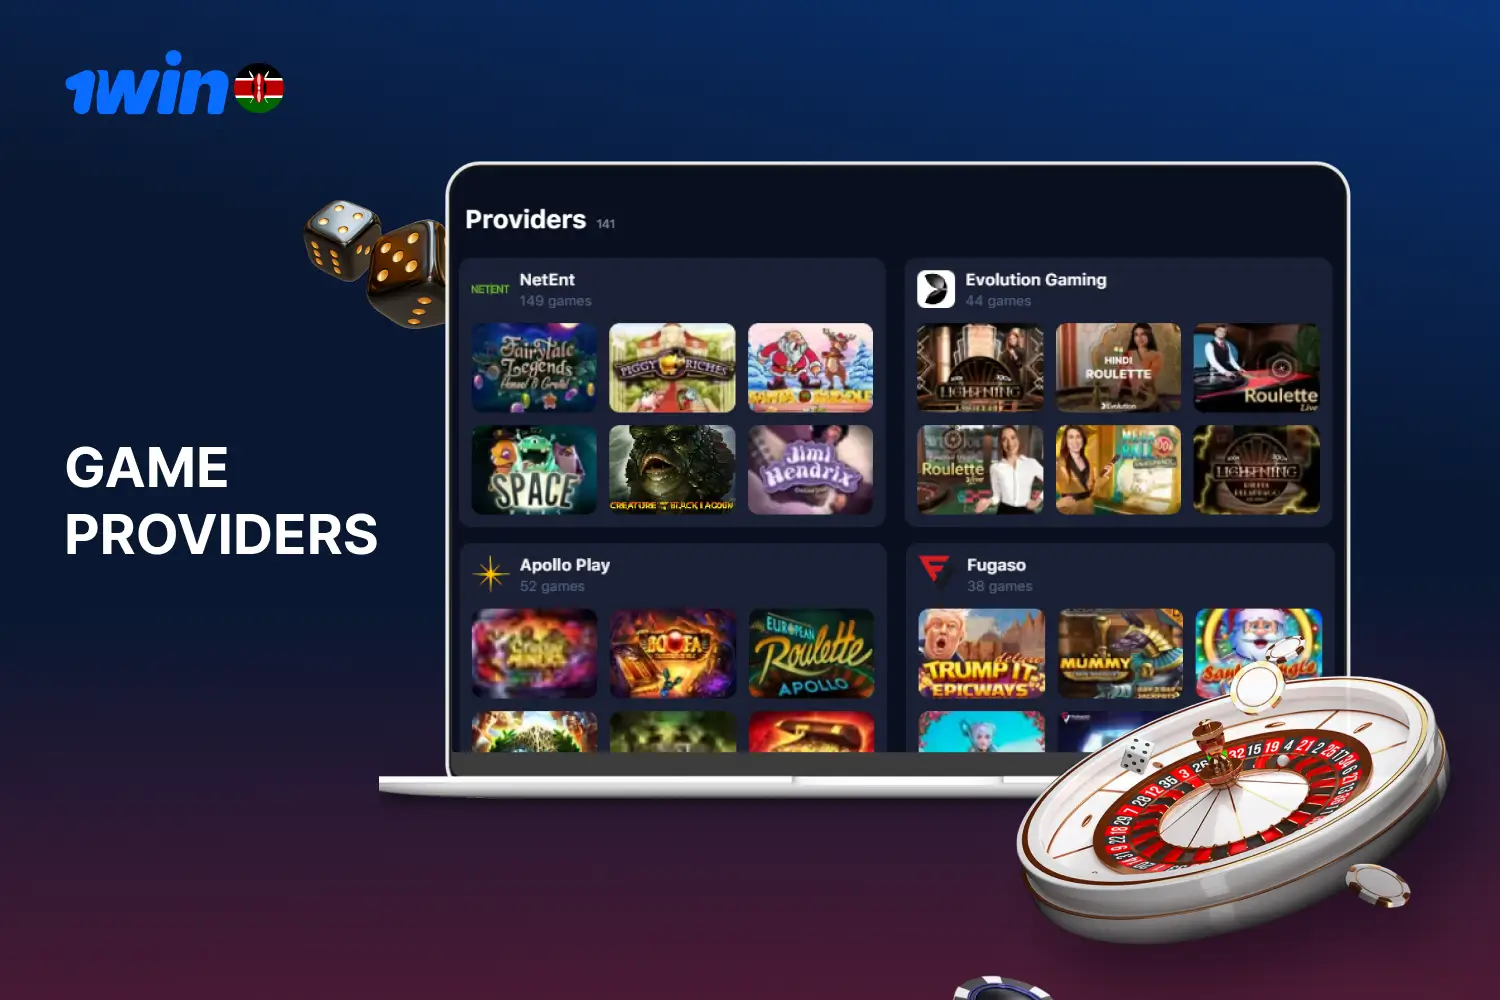 1win casino partners with more than 150 gaming providers to create the best gaming experience for users